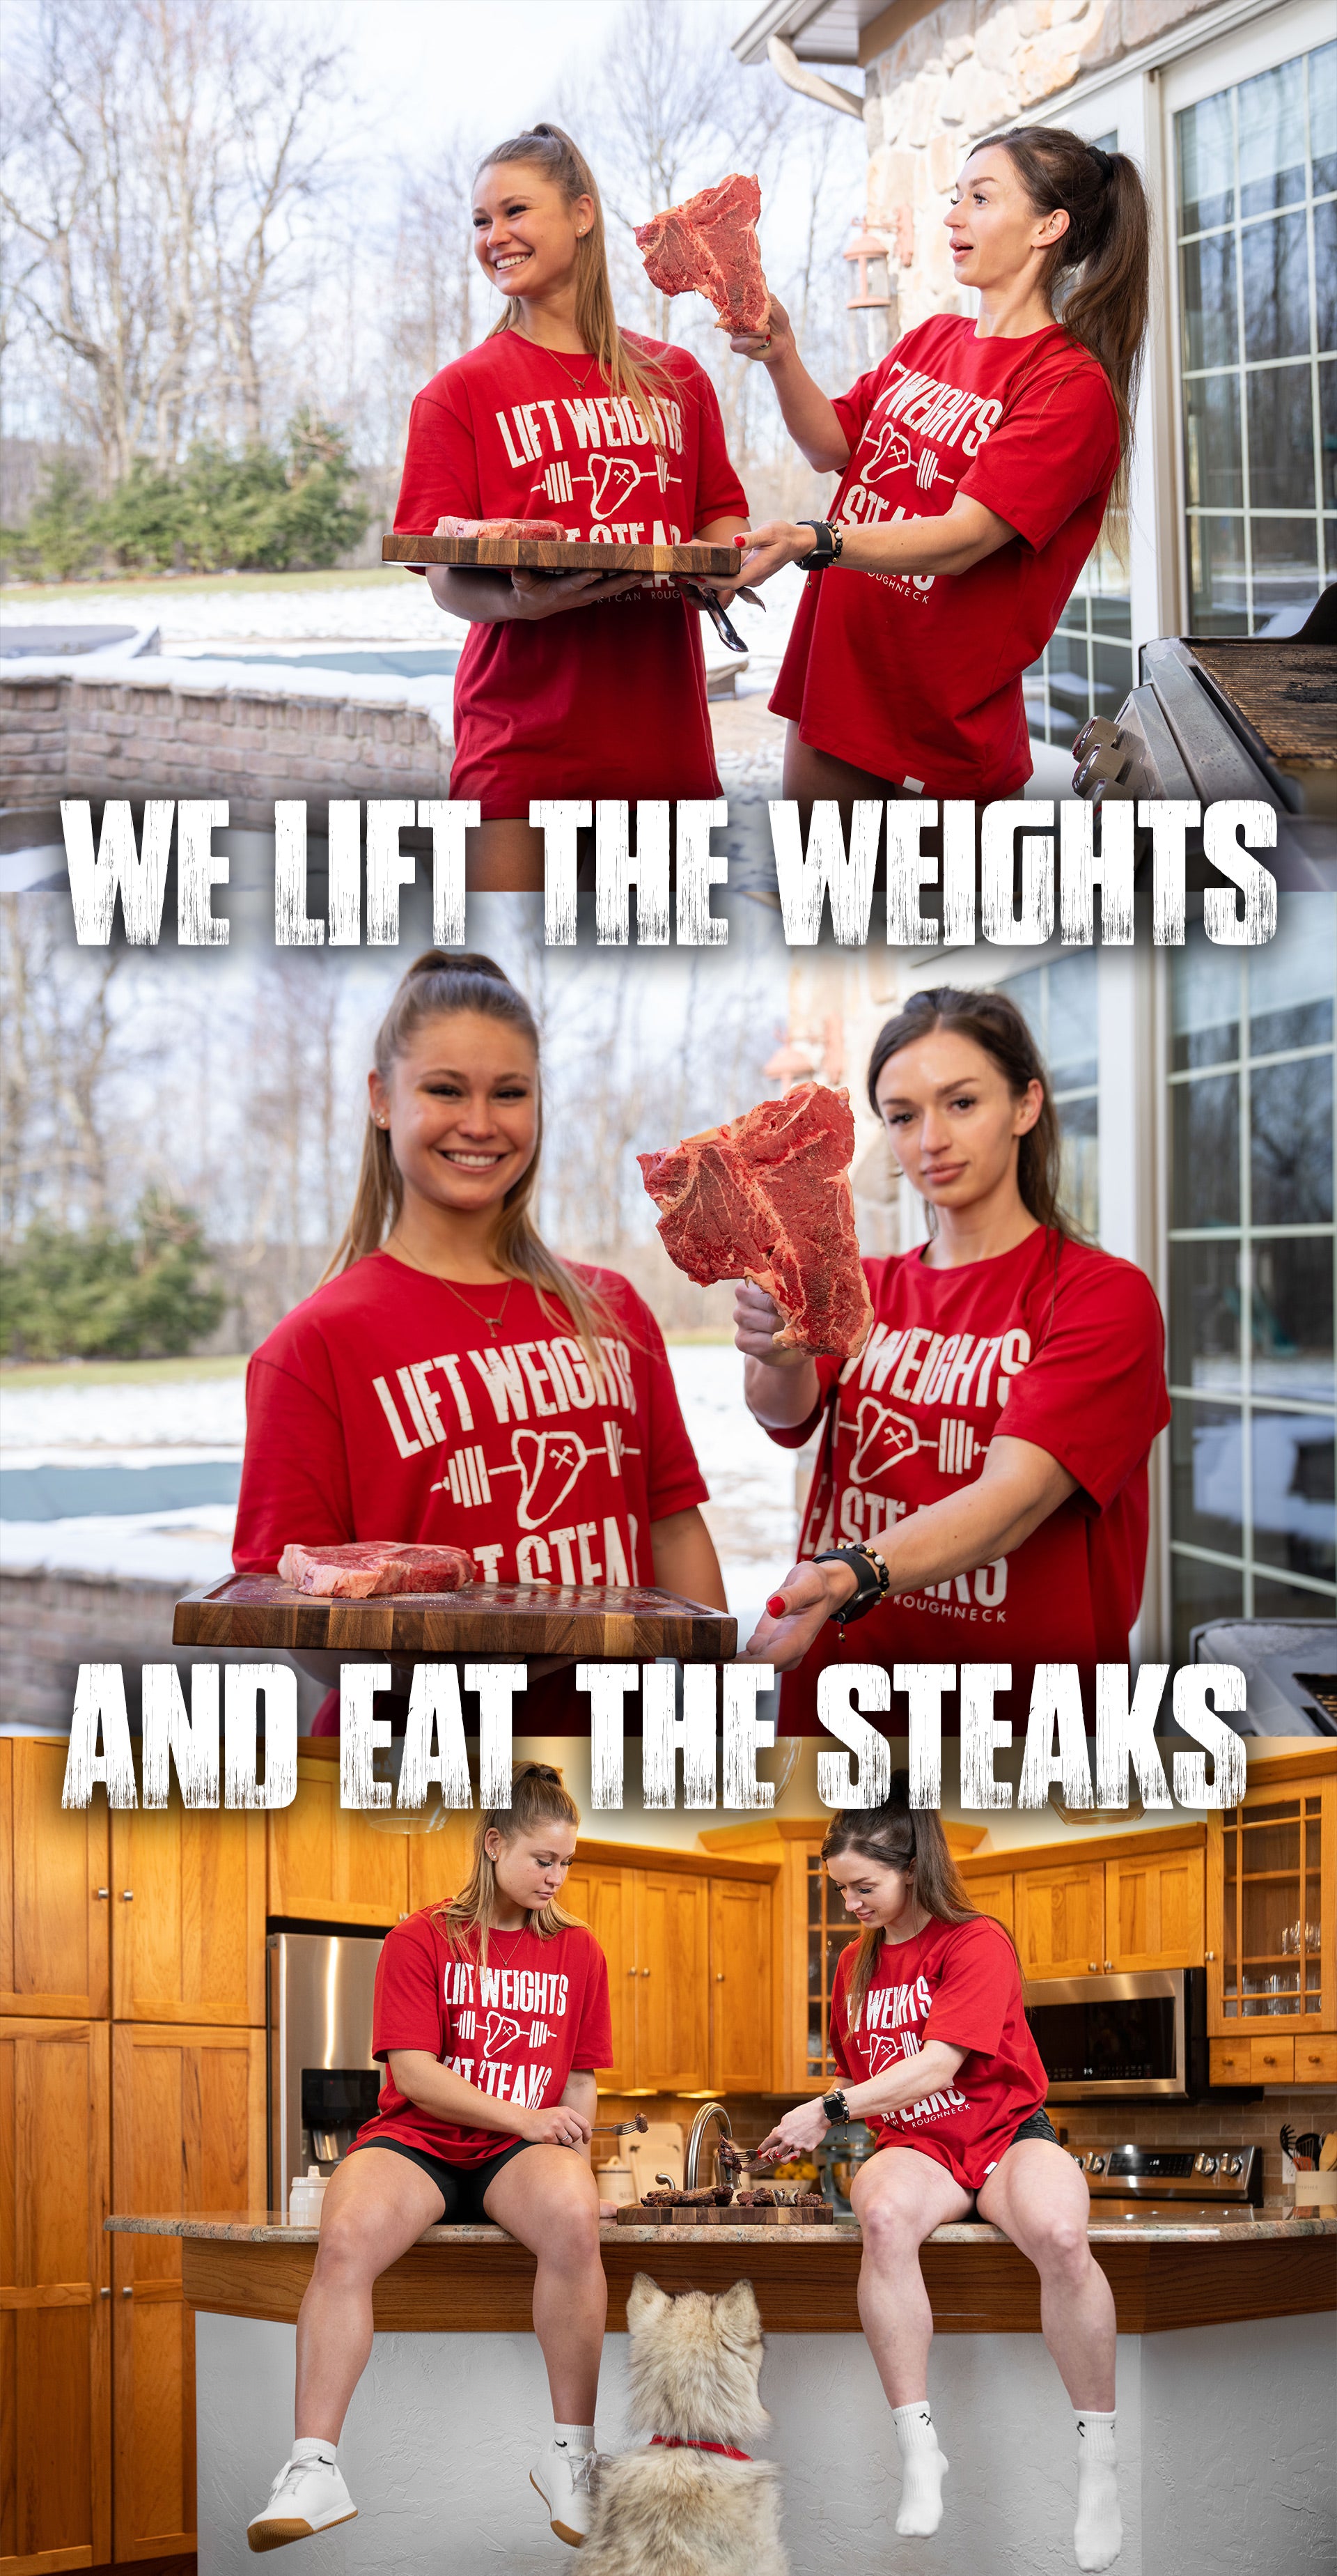 We lift the weights